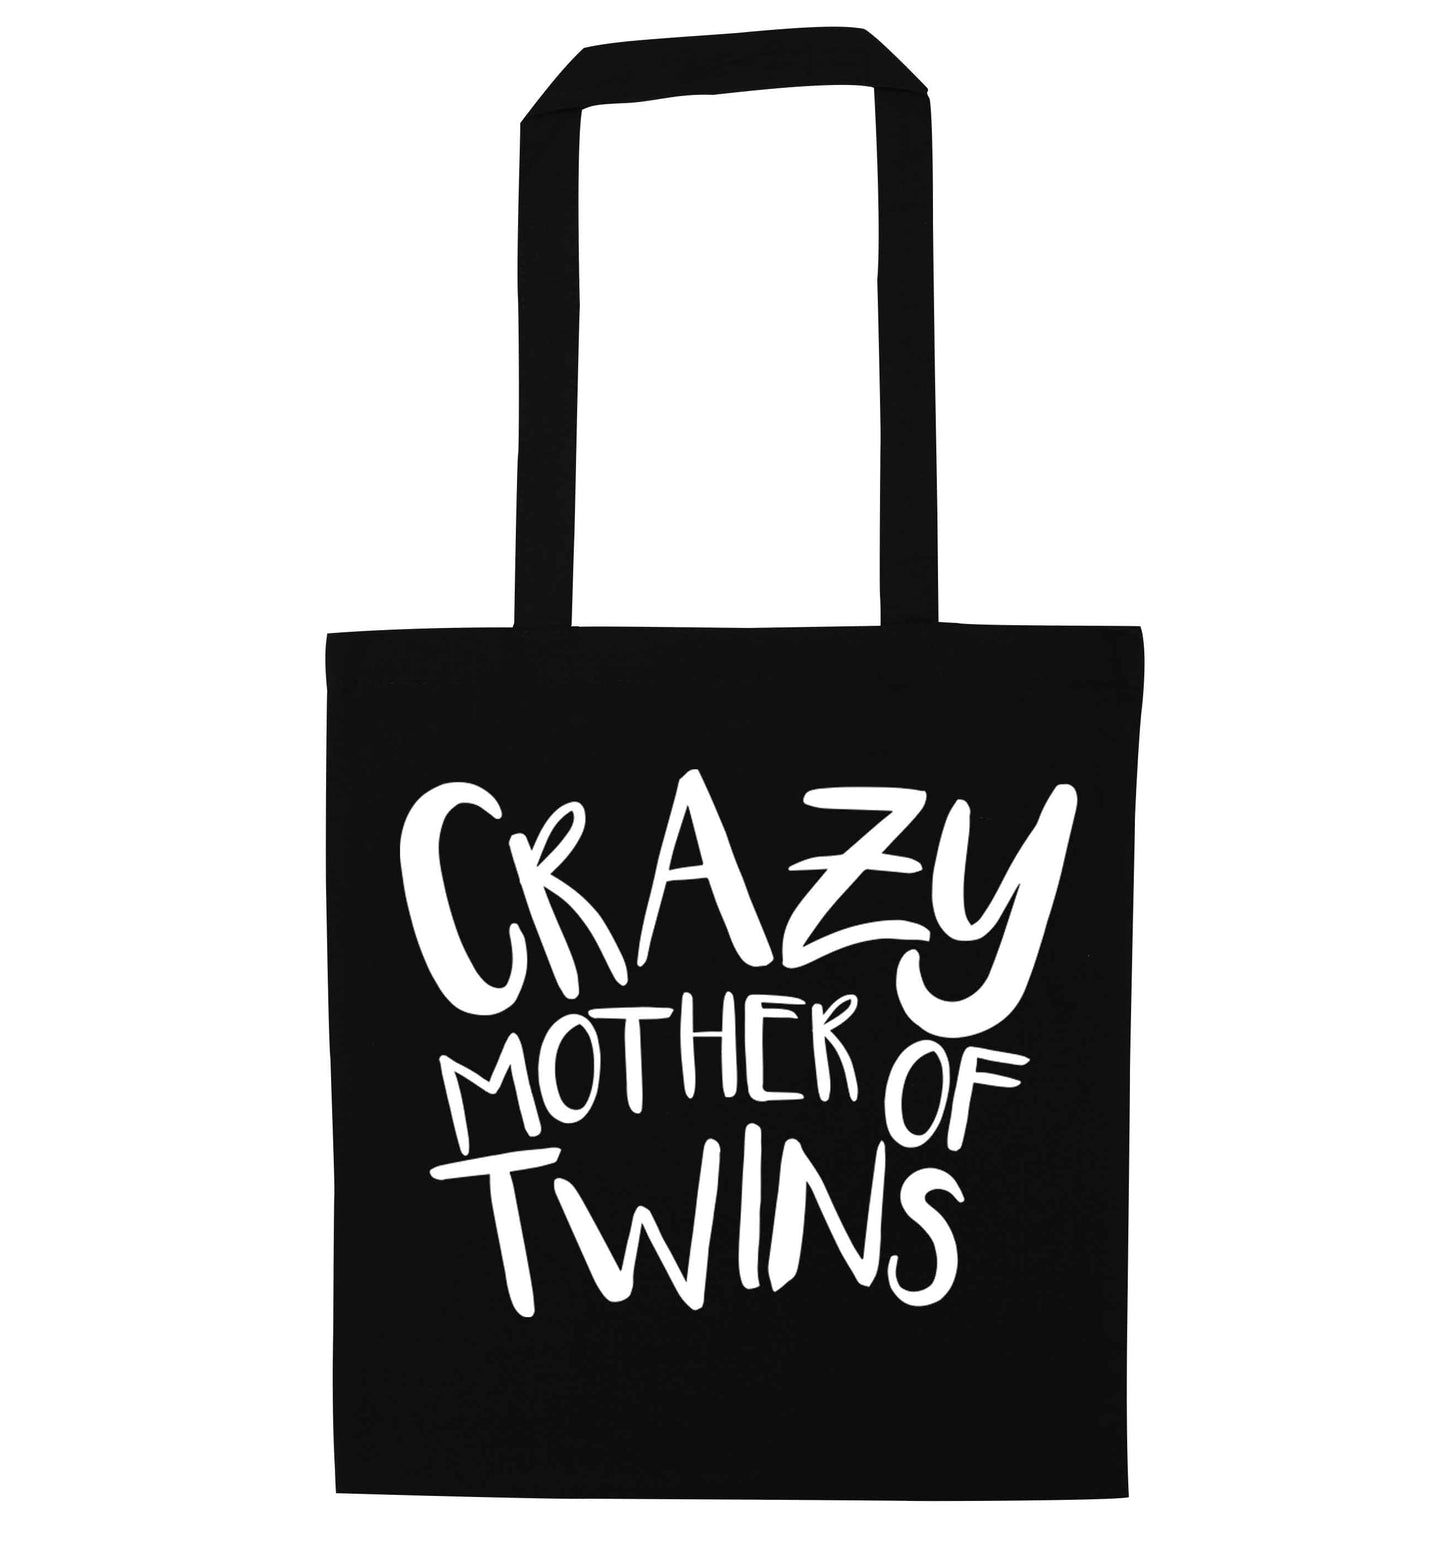 Crazy mother of twins black tote bag